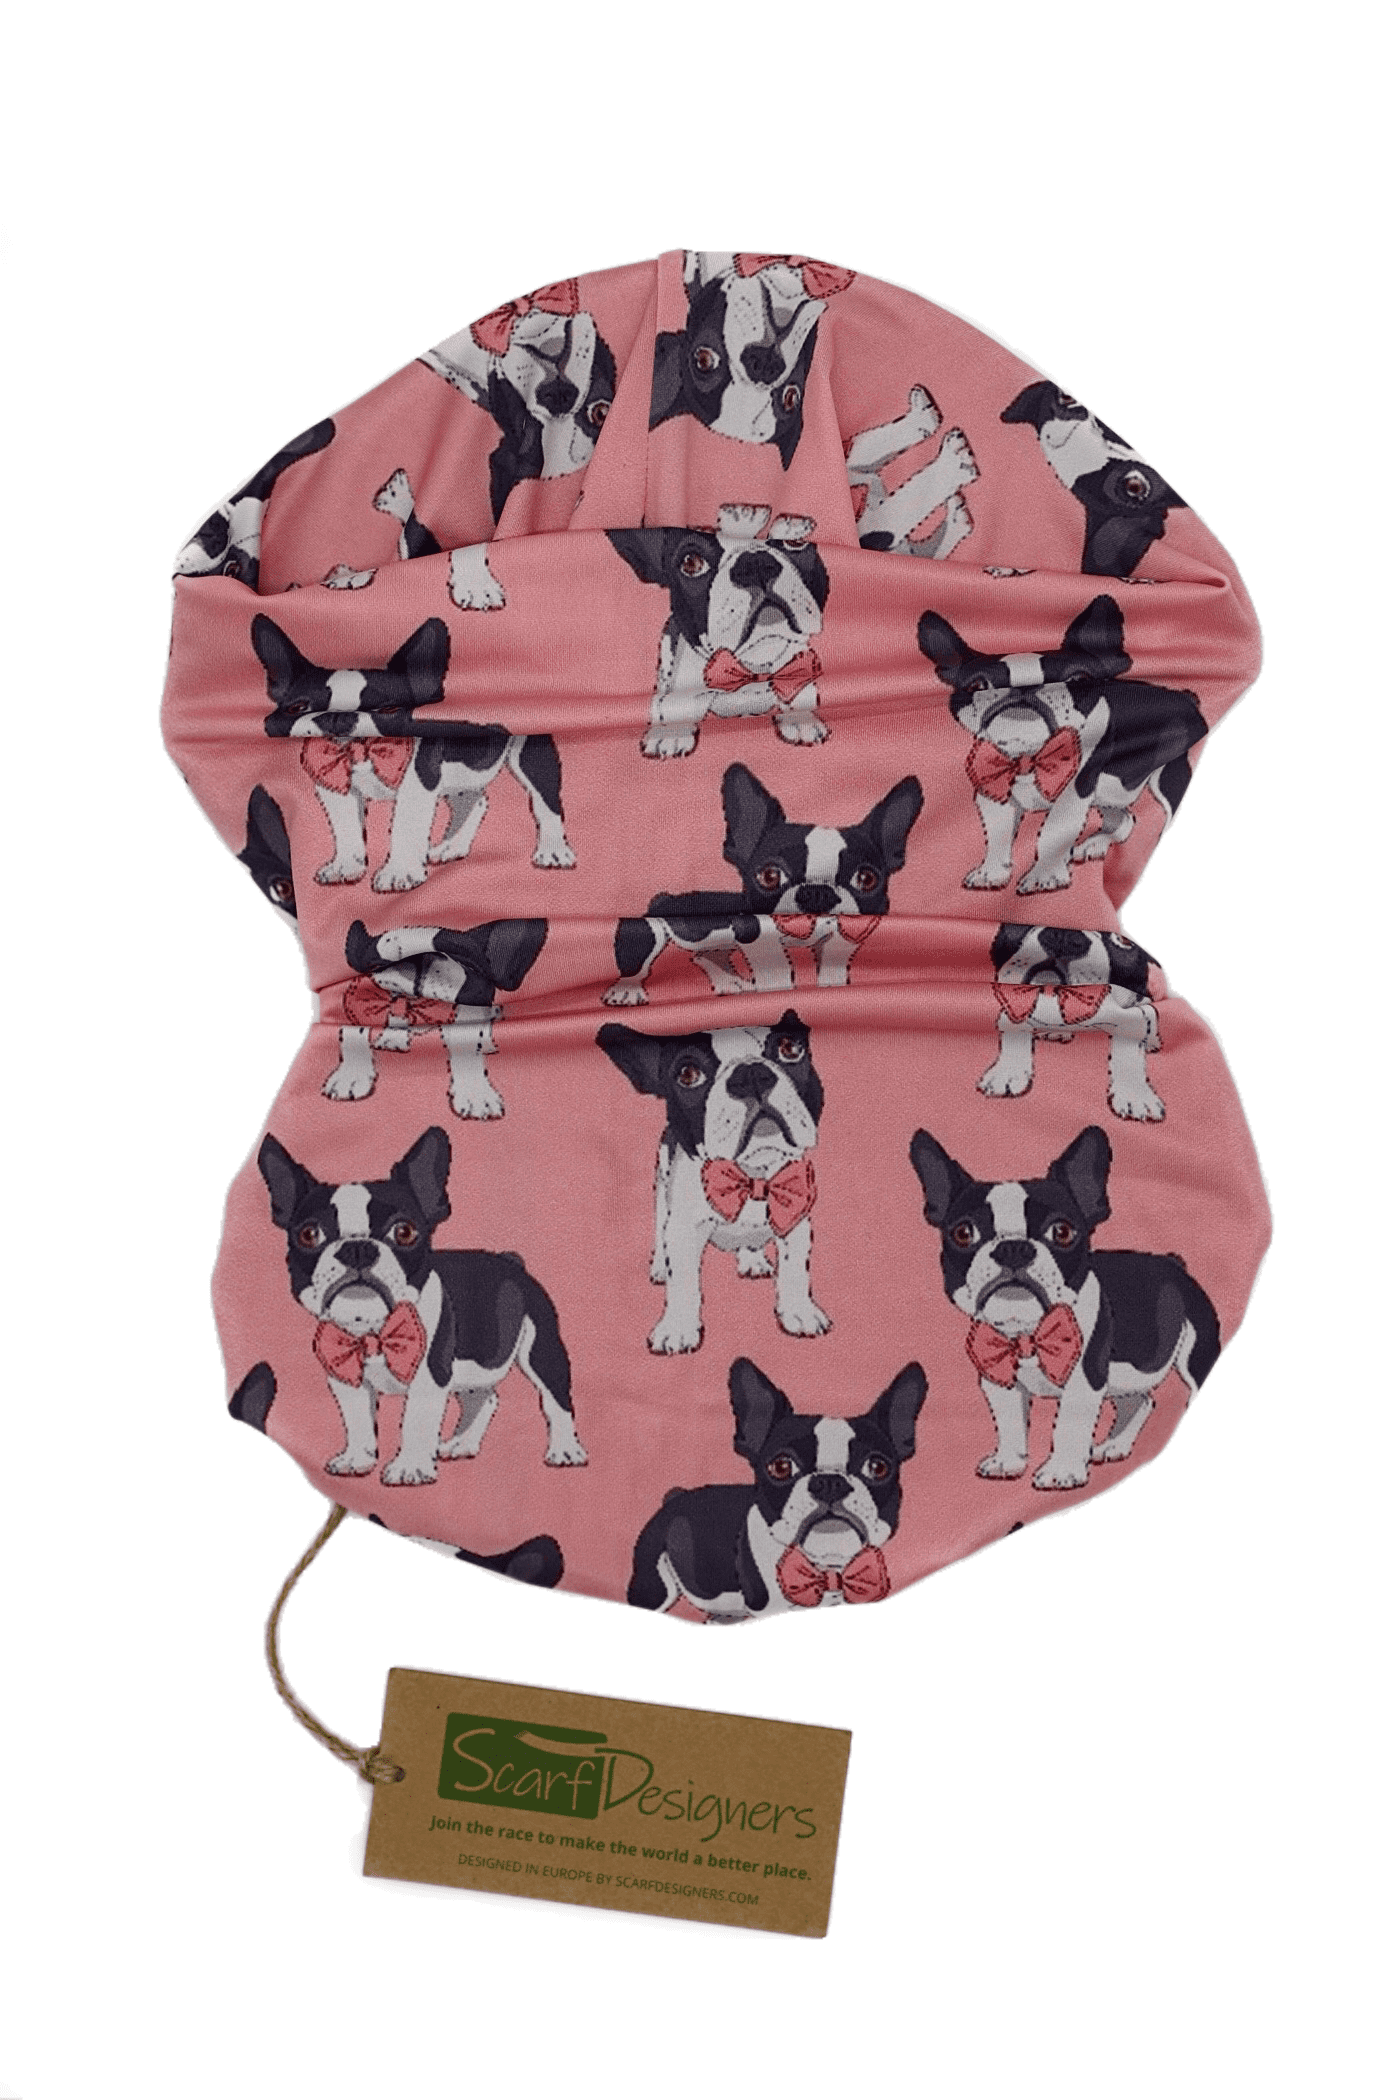 This is a multifunctional and sustainable bandana for women with a French Bulldog print in pink. It is made from recycled polyester which is breathable, durable, soft to touch, easy to care and fast drying material. It makes it perfectly suitable for all kinds of sports like biking, hiking, jogging or skiing. This is a versatile bandana that can be used as a scarf, face mask, bandana or headband and it is also known as tube scarf, neck gaiter or face mask. It is a vegan product certified by PETA.